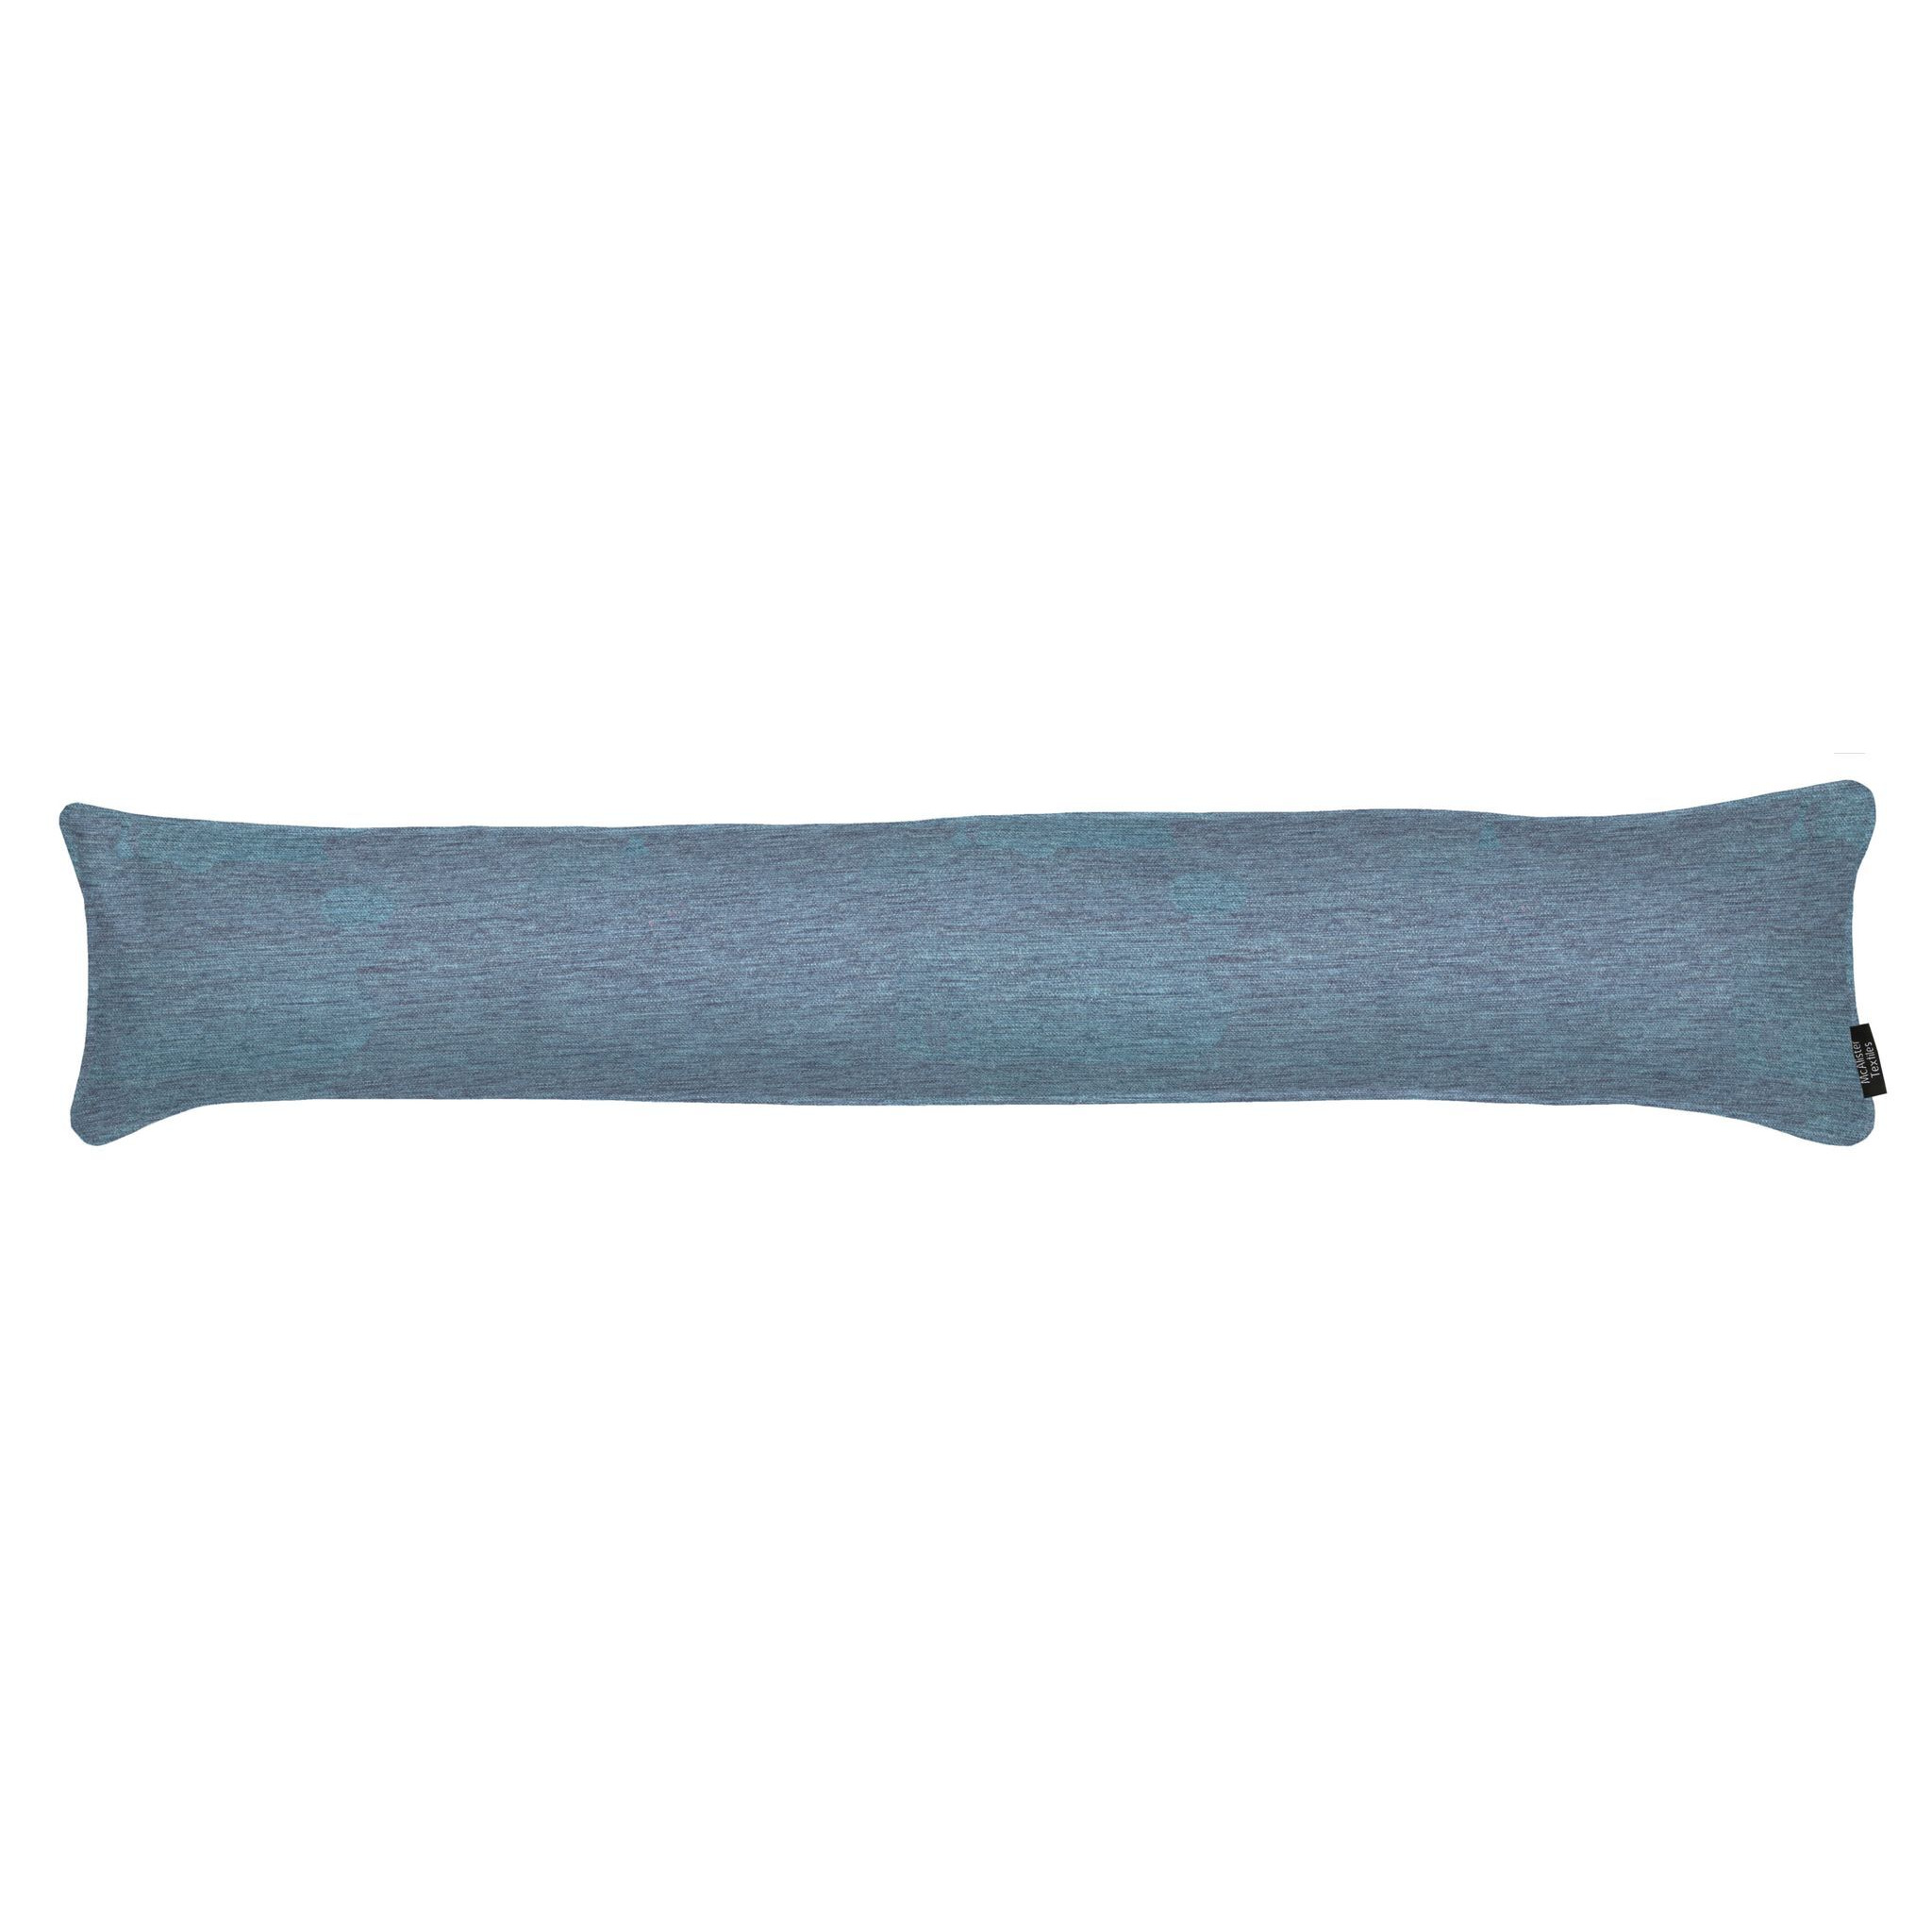 Plain Chenille Wedgewood Blue Draught Excluder, 18cm x 80cm